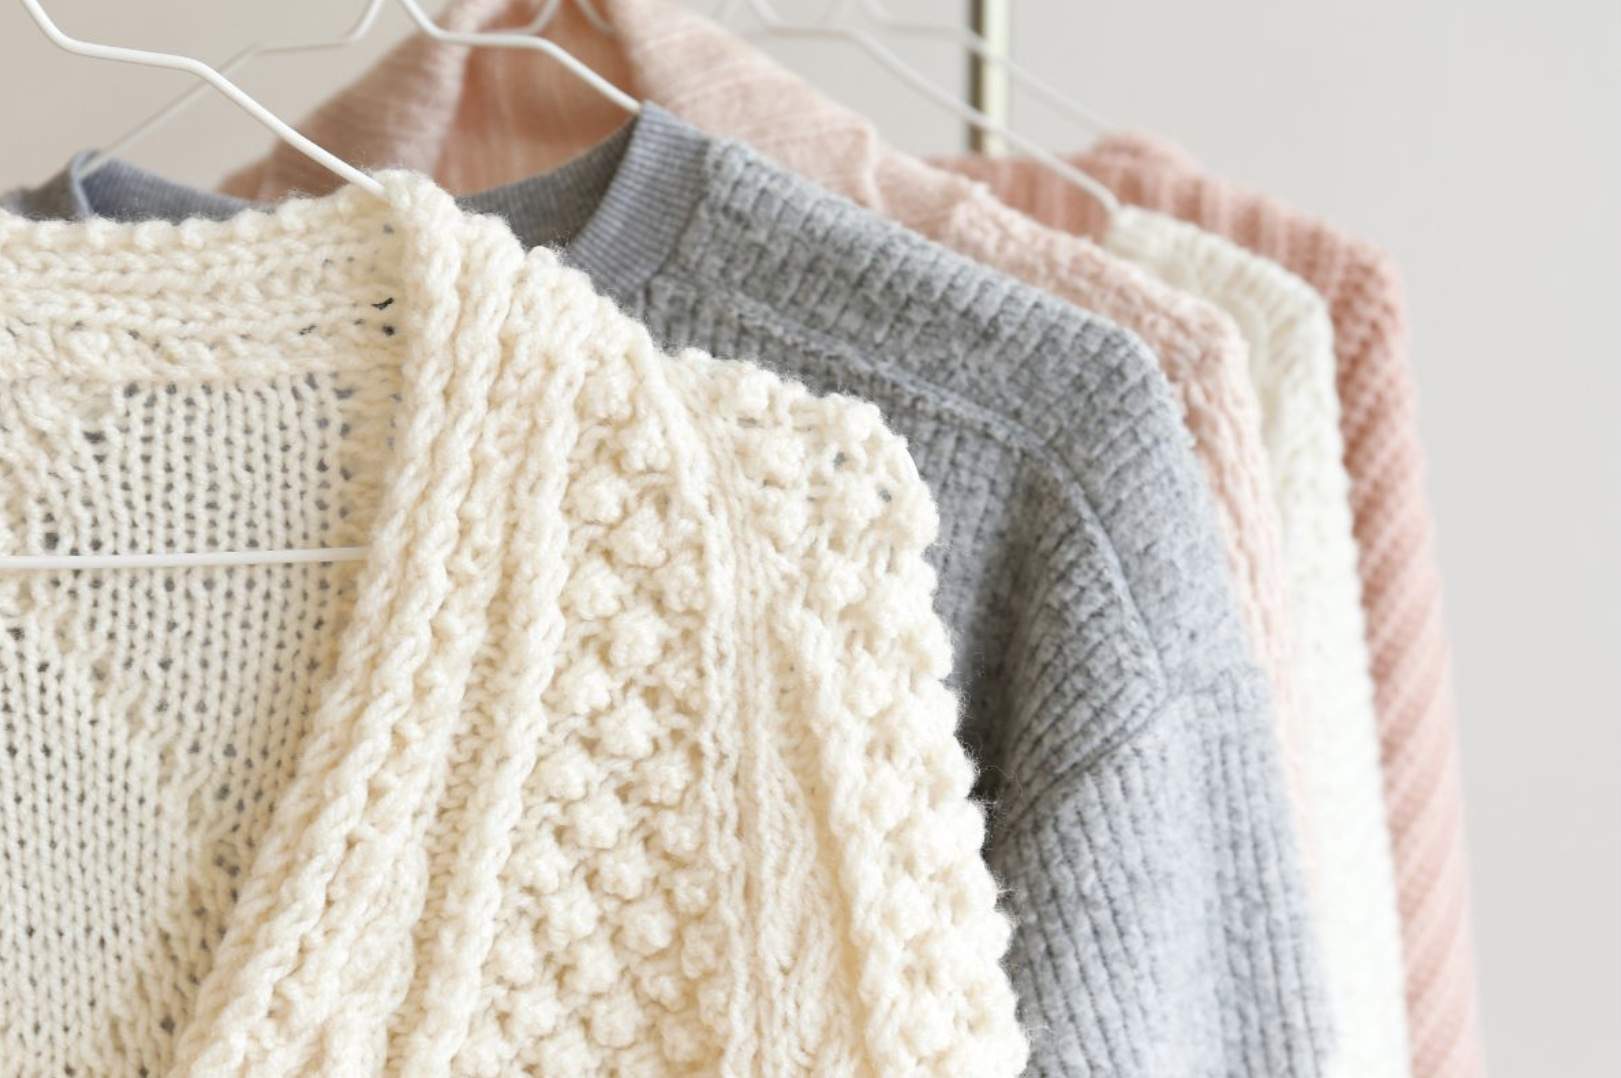 Winter sweaters hanging in the closet.